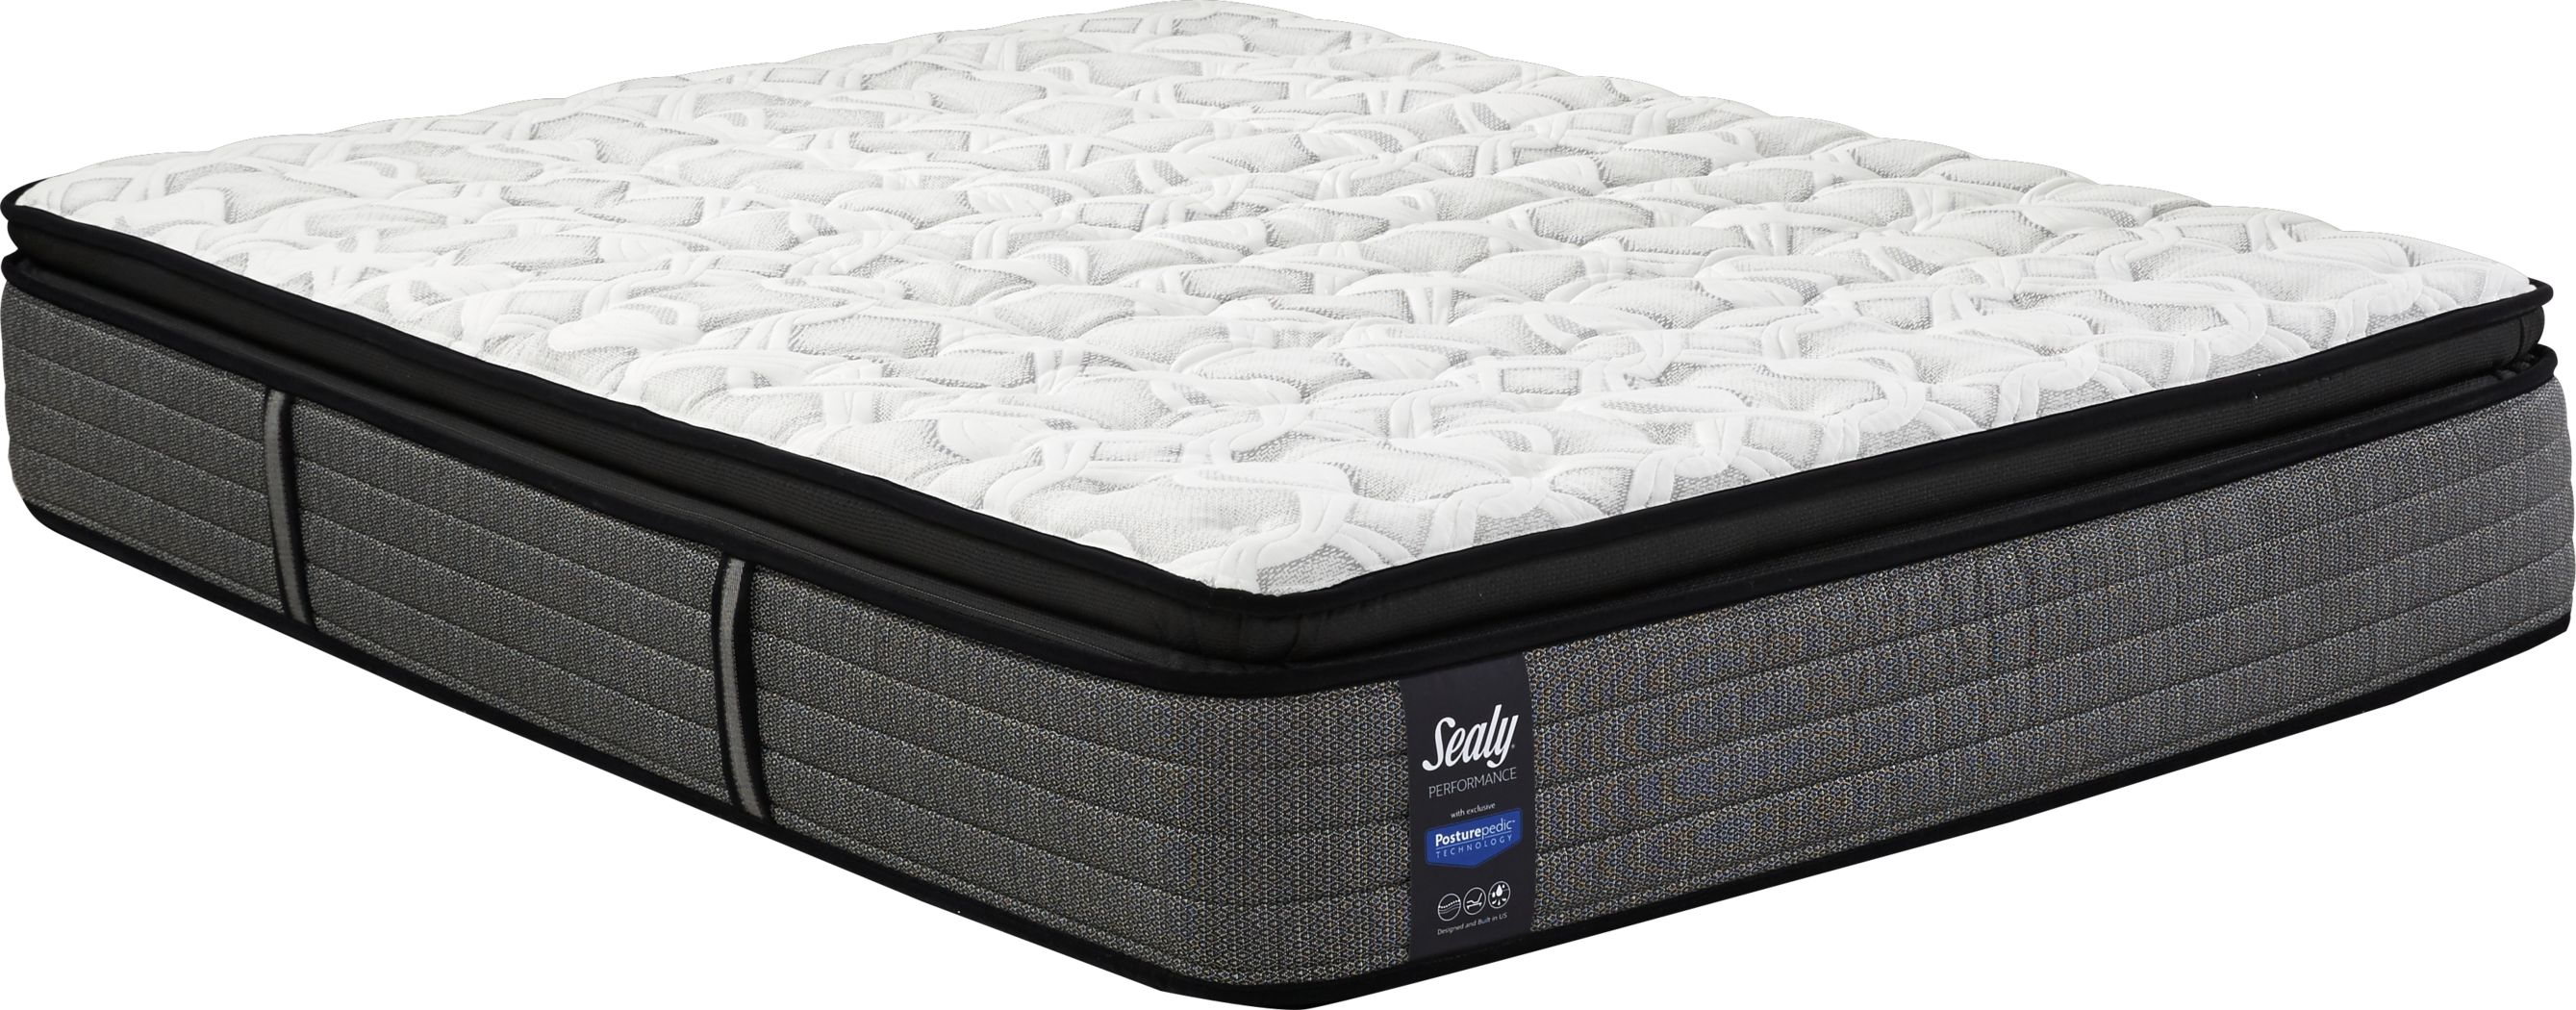 sealy performance paradise cove queen mattress set reviews